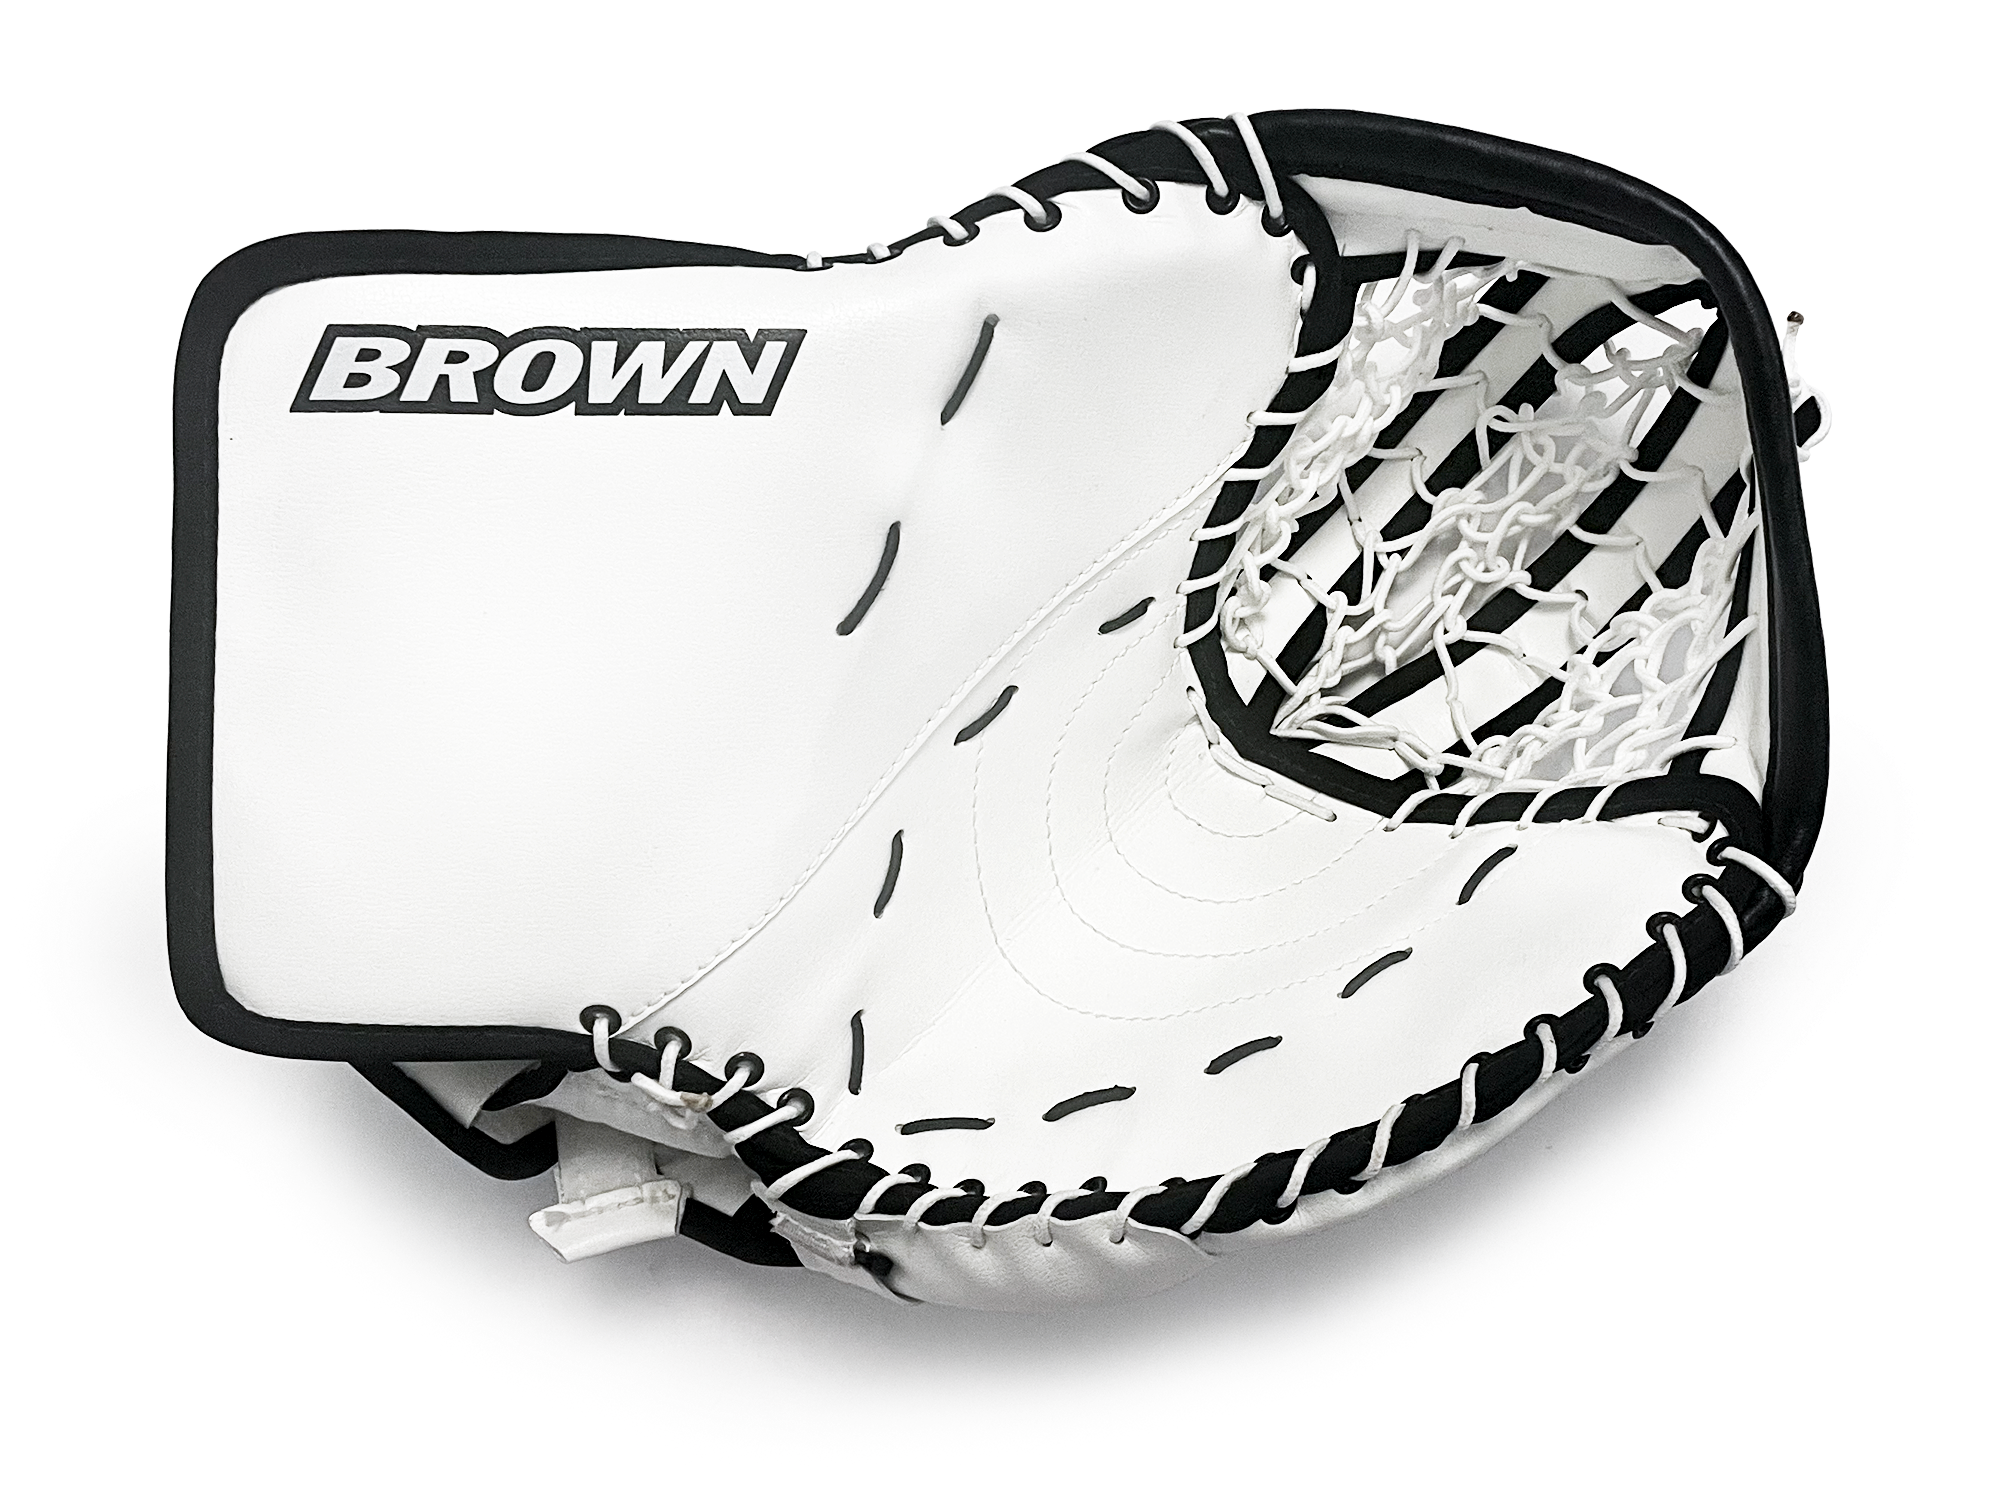 Alternate 2500 catch glove layout in white and black